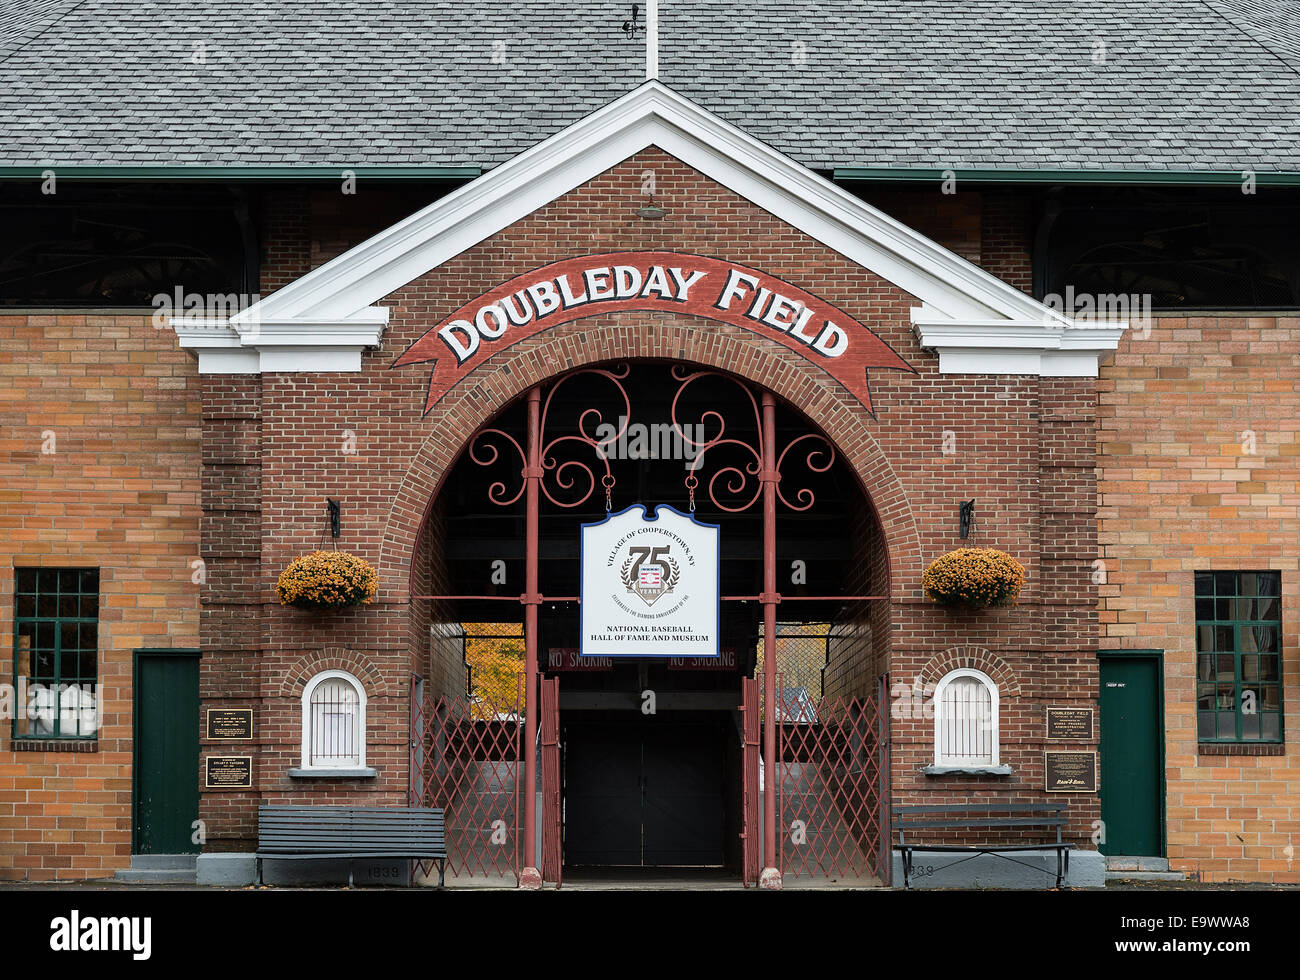 Doubleday Field baseball park, Cooperstown, New York, USA Stock Photo